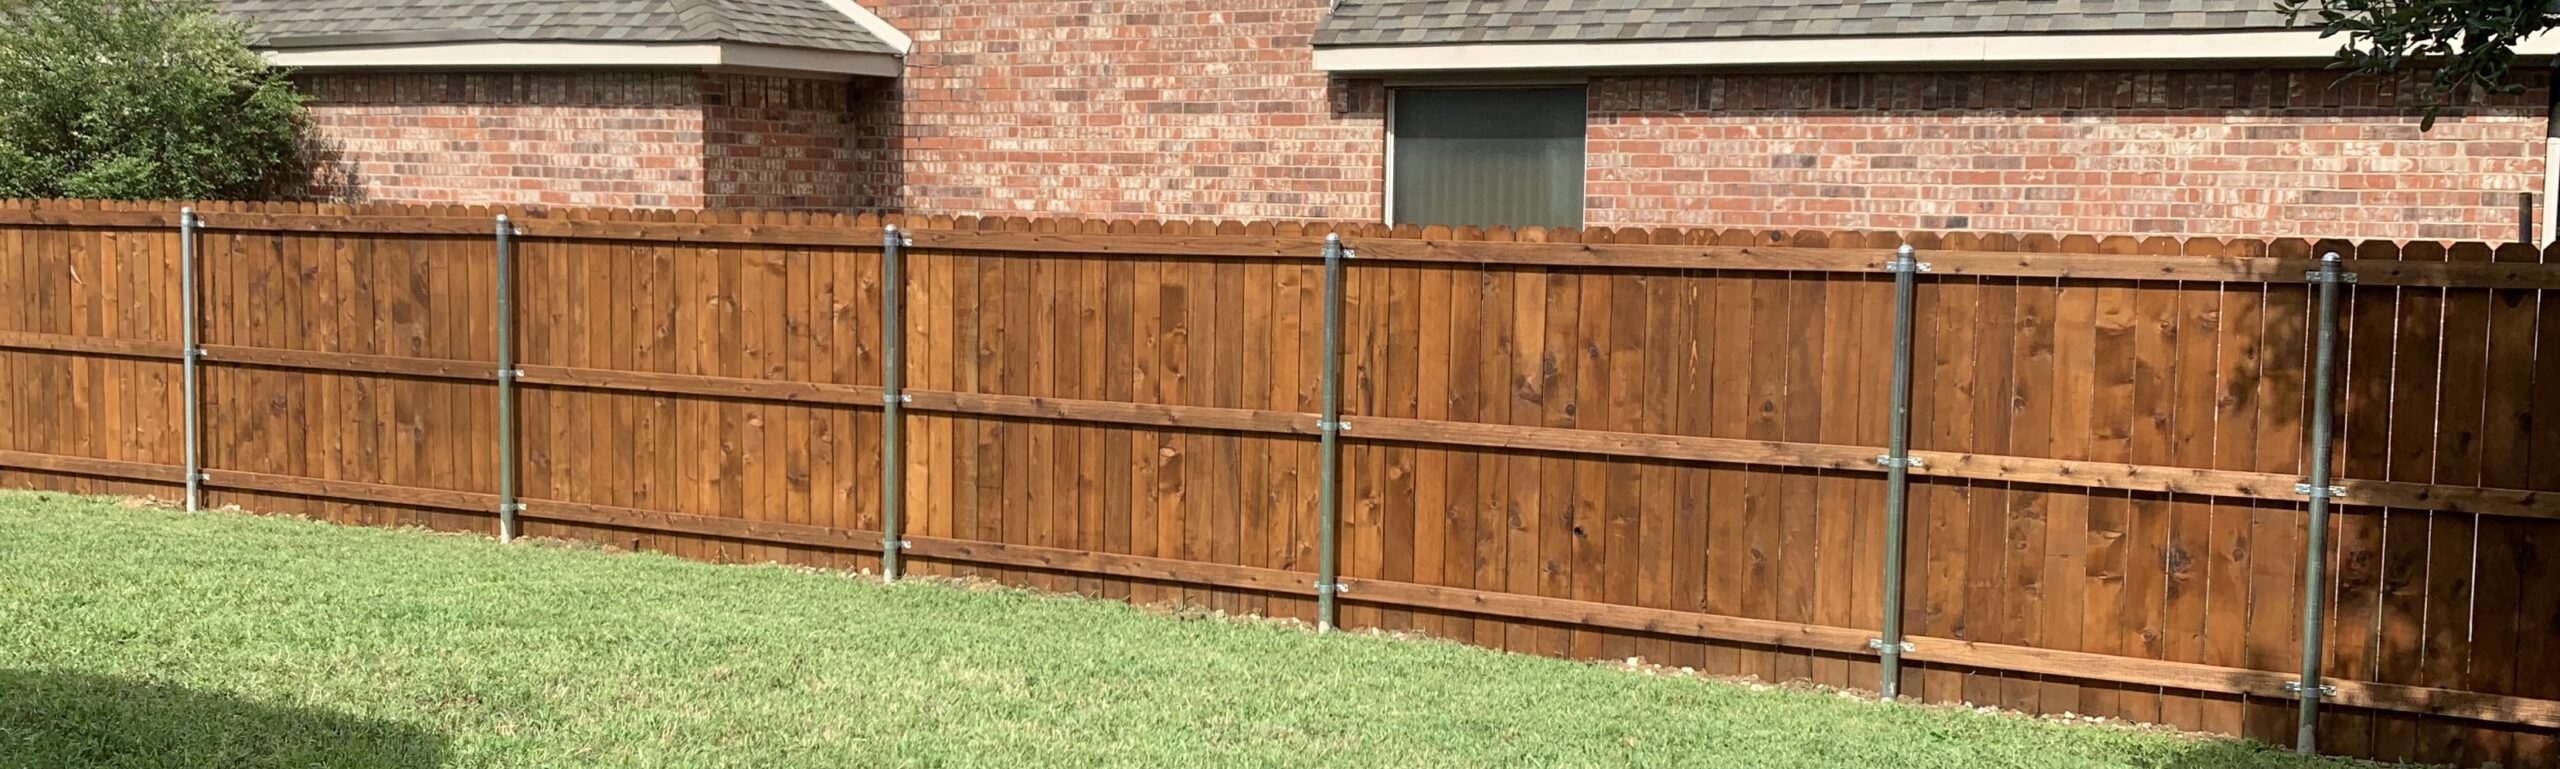 Low Cost Fence Company Flower Mound TX